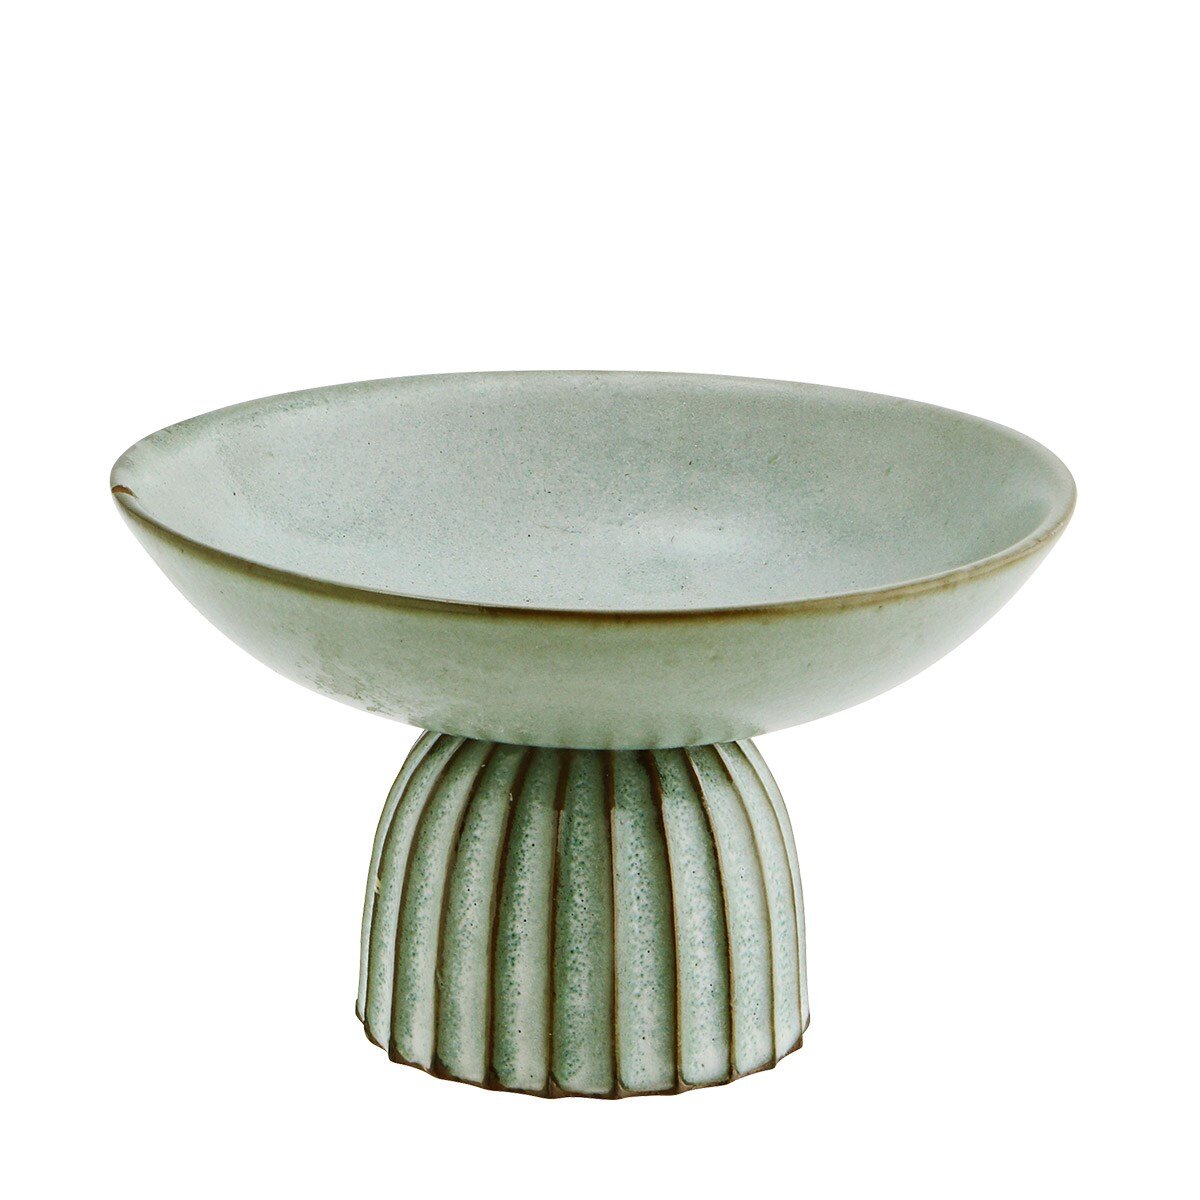 Bowl On Stand Stoneware Green Small